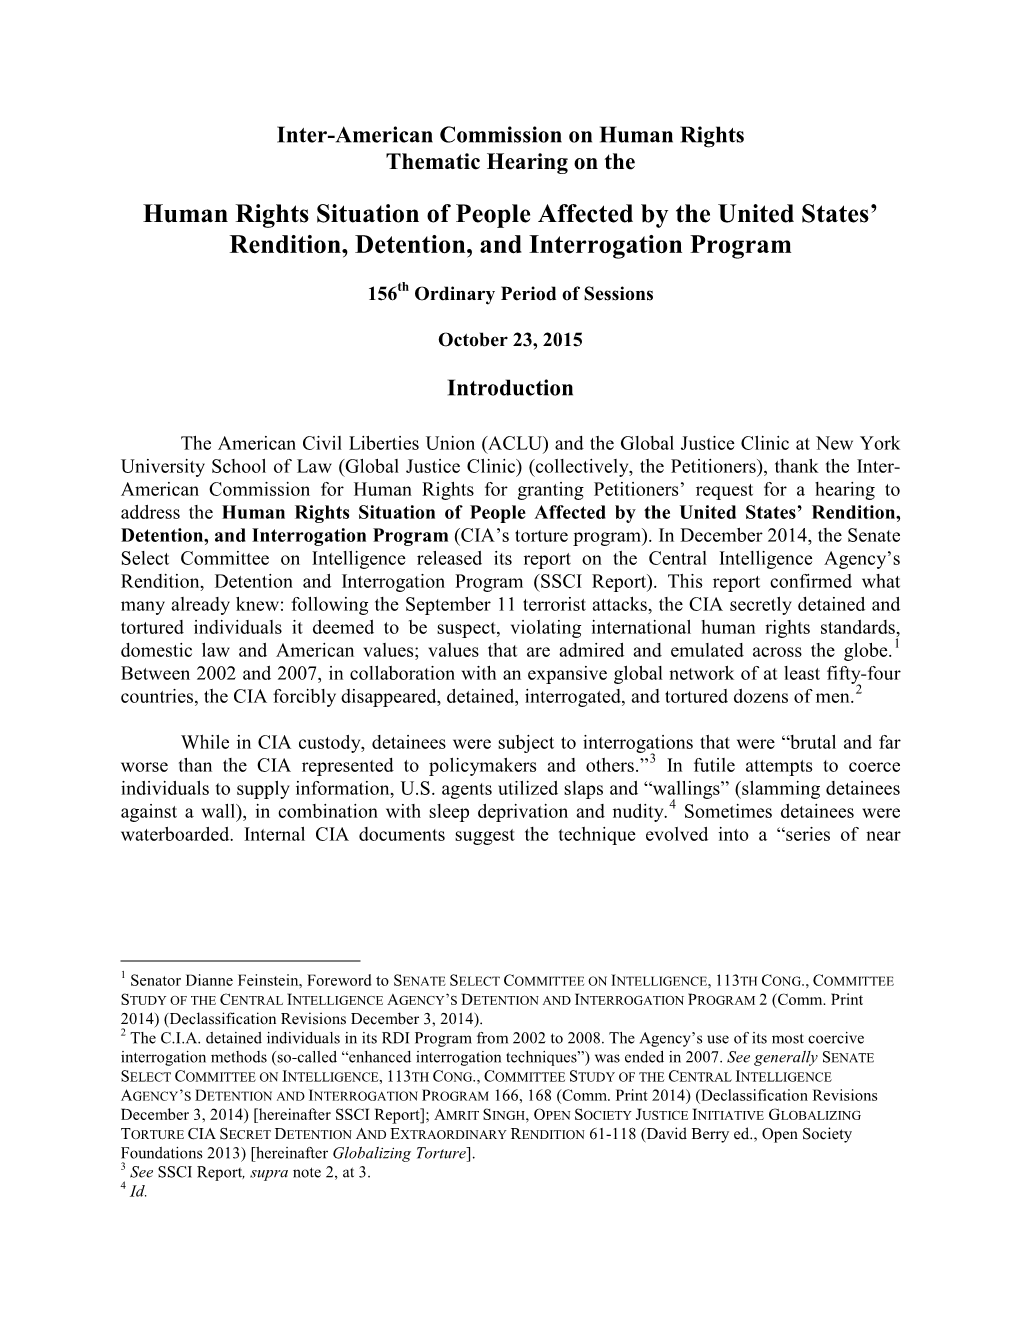 Human Rights Situation of People Affected by the United States’ Rendition, Detention, and Interrogation Program